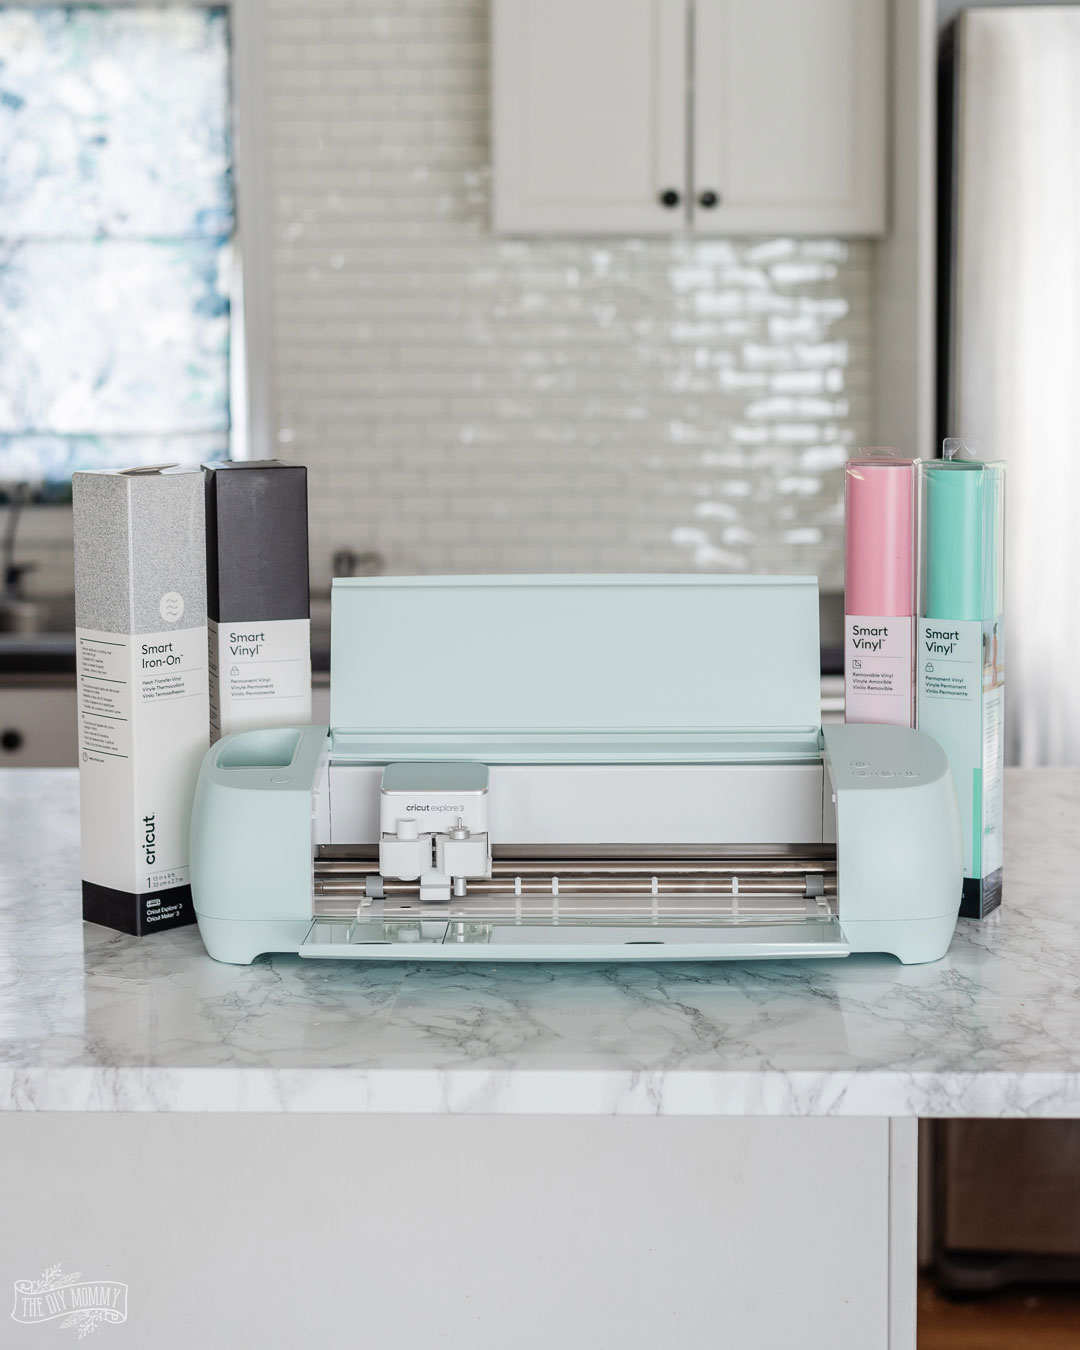 Cricut Explore 3 Review (everything you need to know about this new smart cutting machine!)